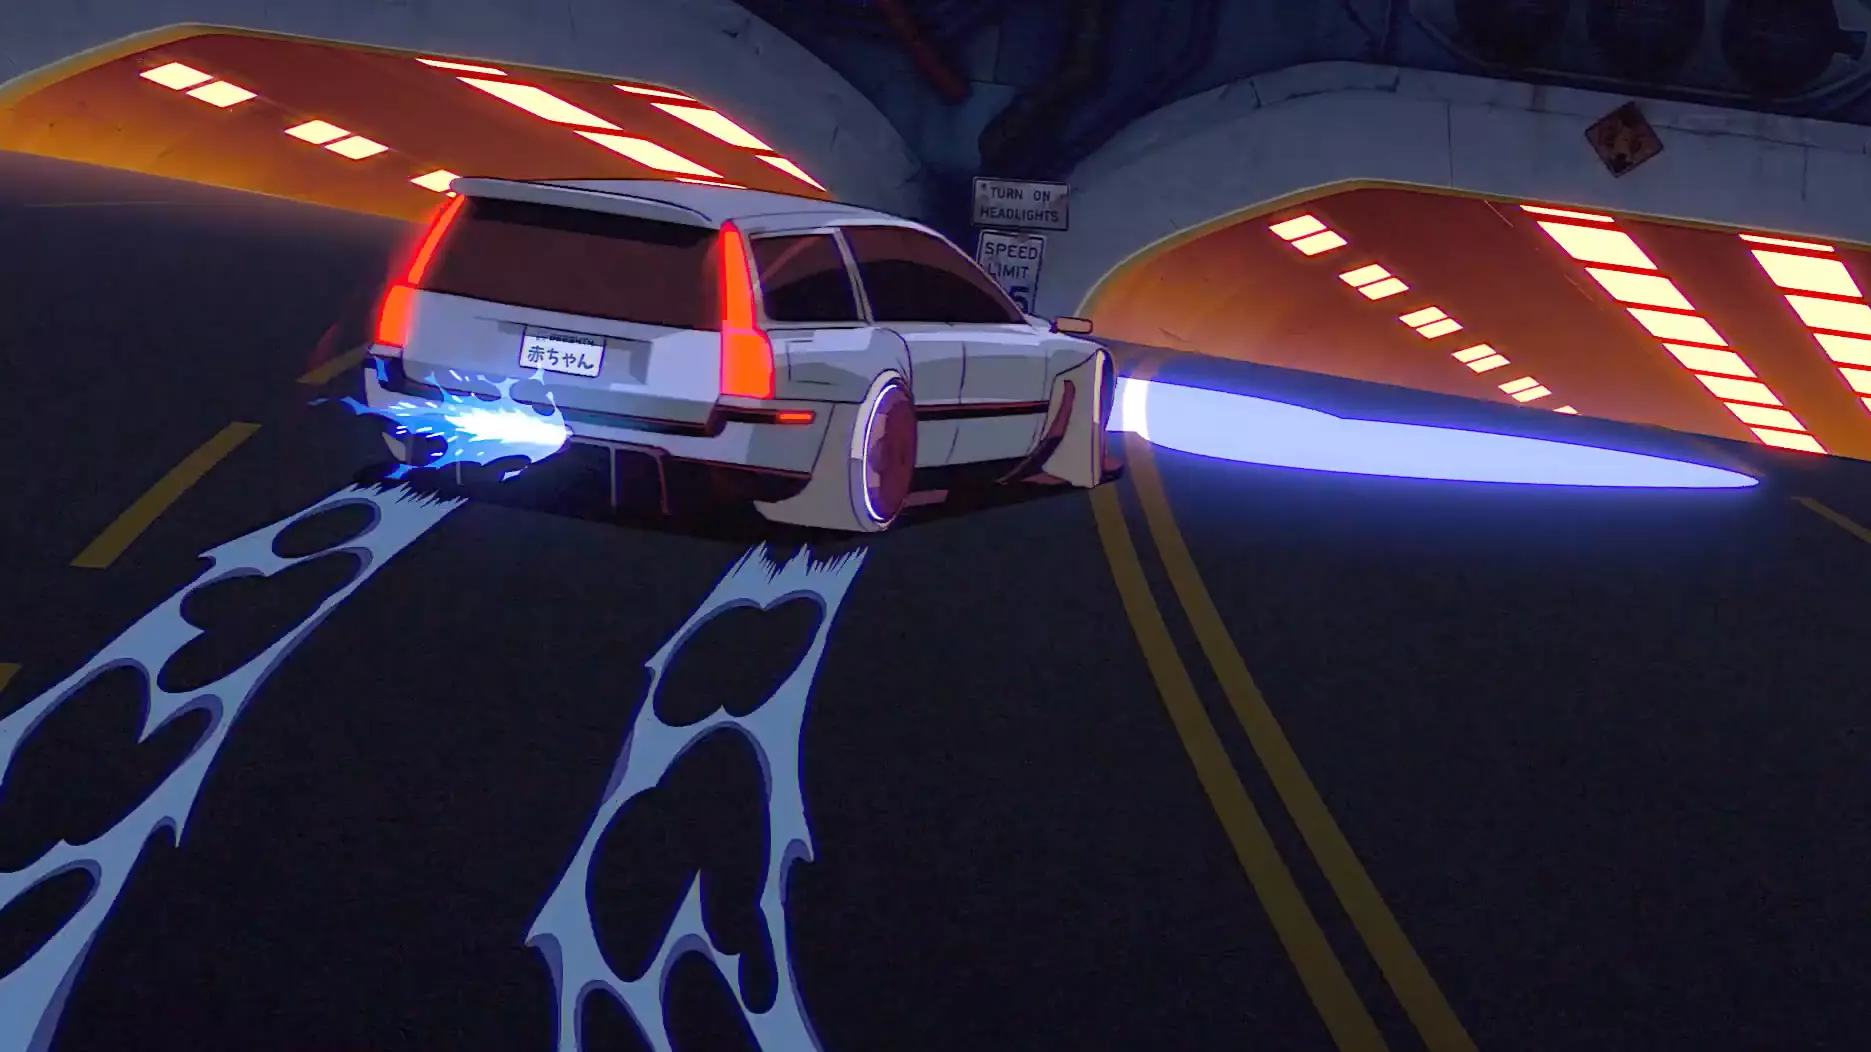 Check Out This Amazingly Animated Baby Announcement With a Cyberpunk Volvo | Autance